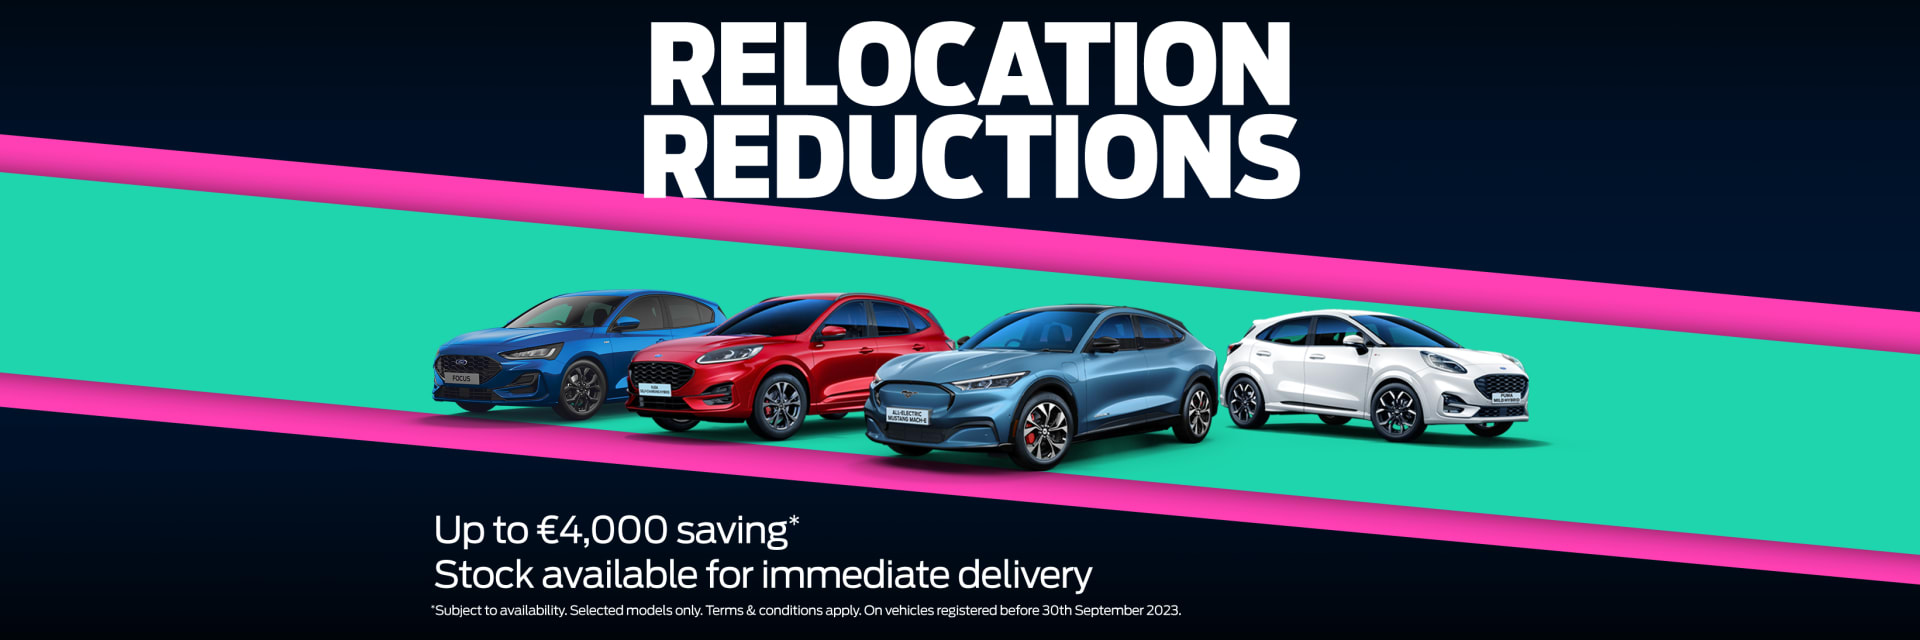 Relocation Reductions at Bright Ford